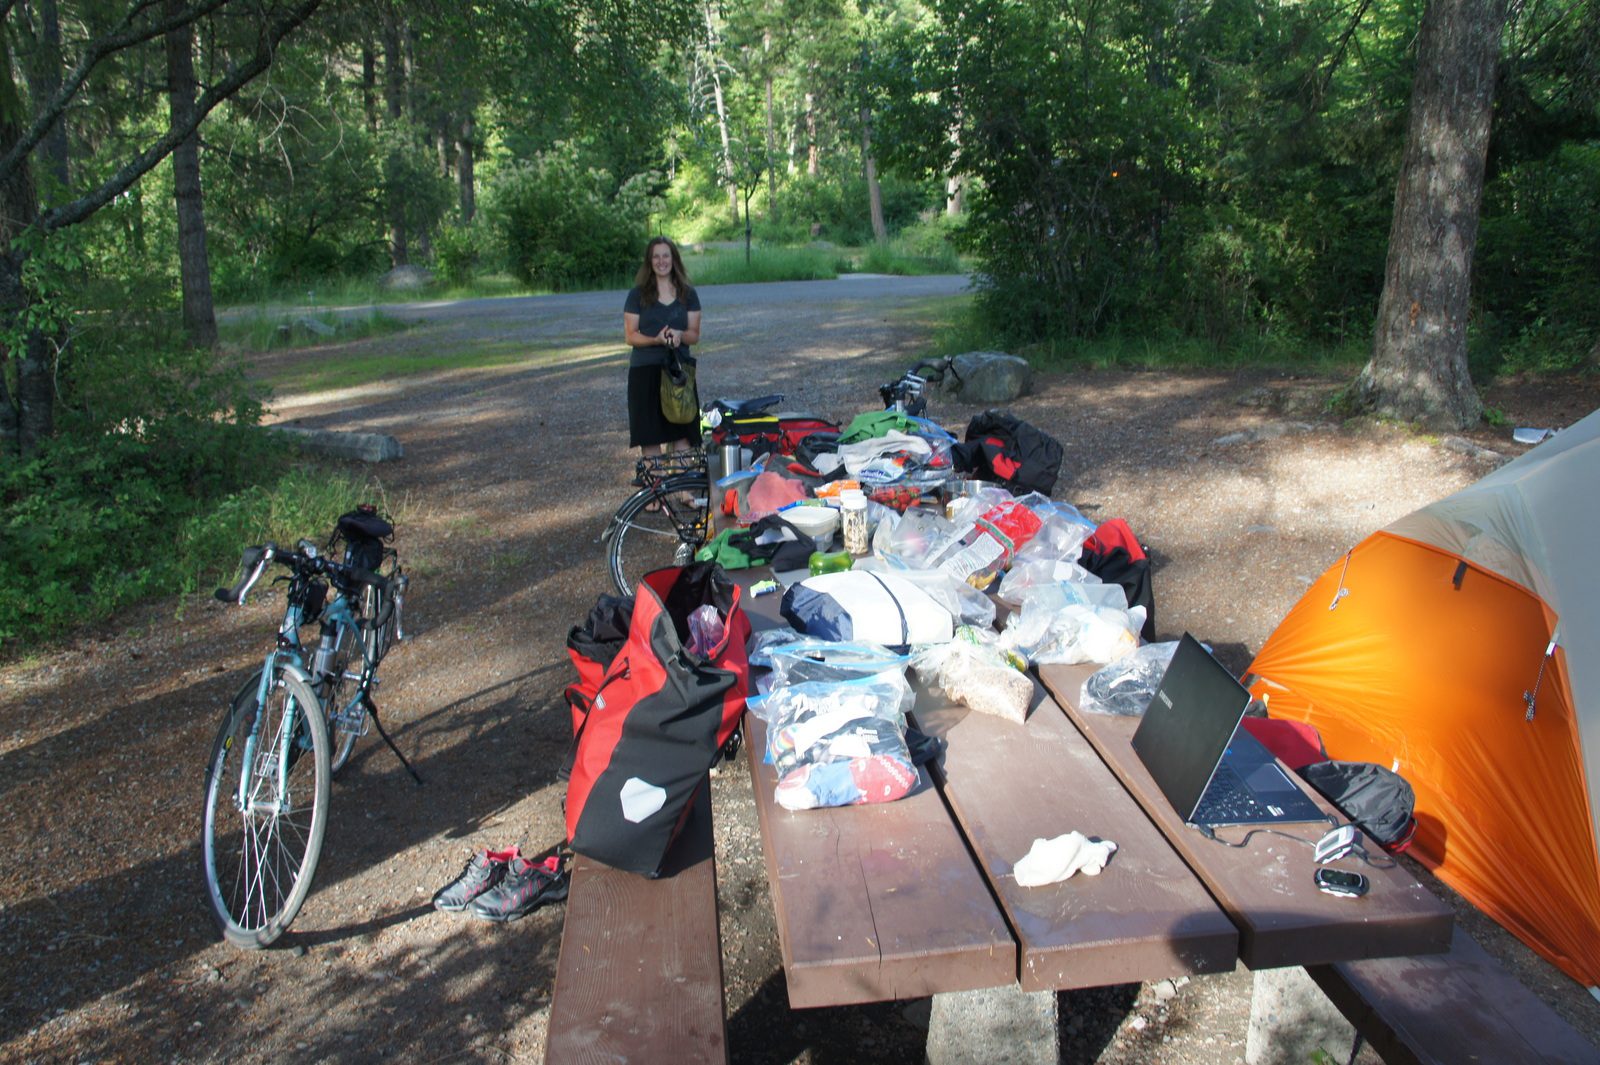 Does all this stuff really fit in six panniers? Exploding Travel Gear Inc.